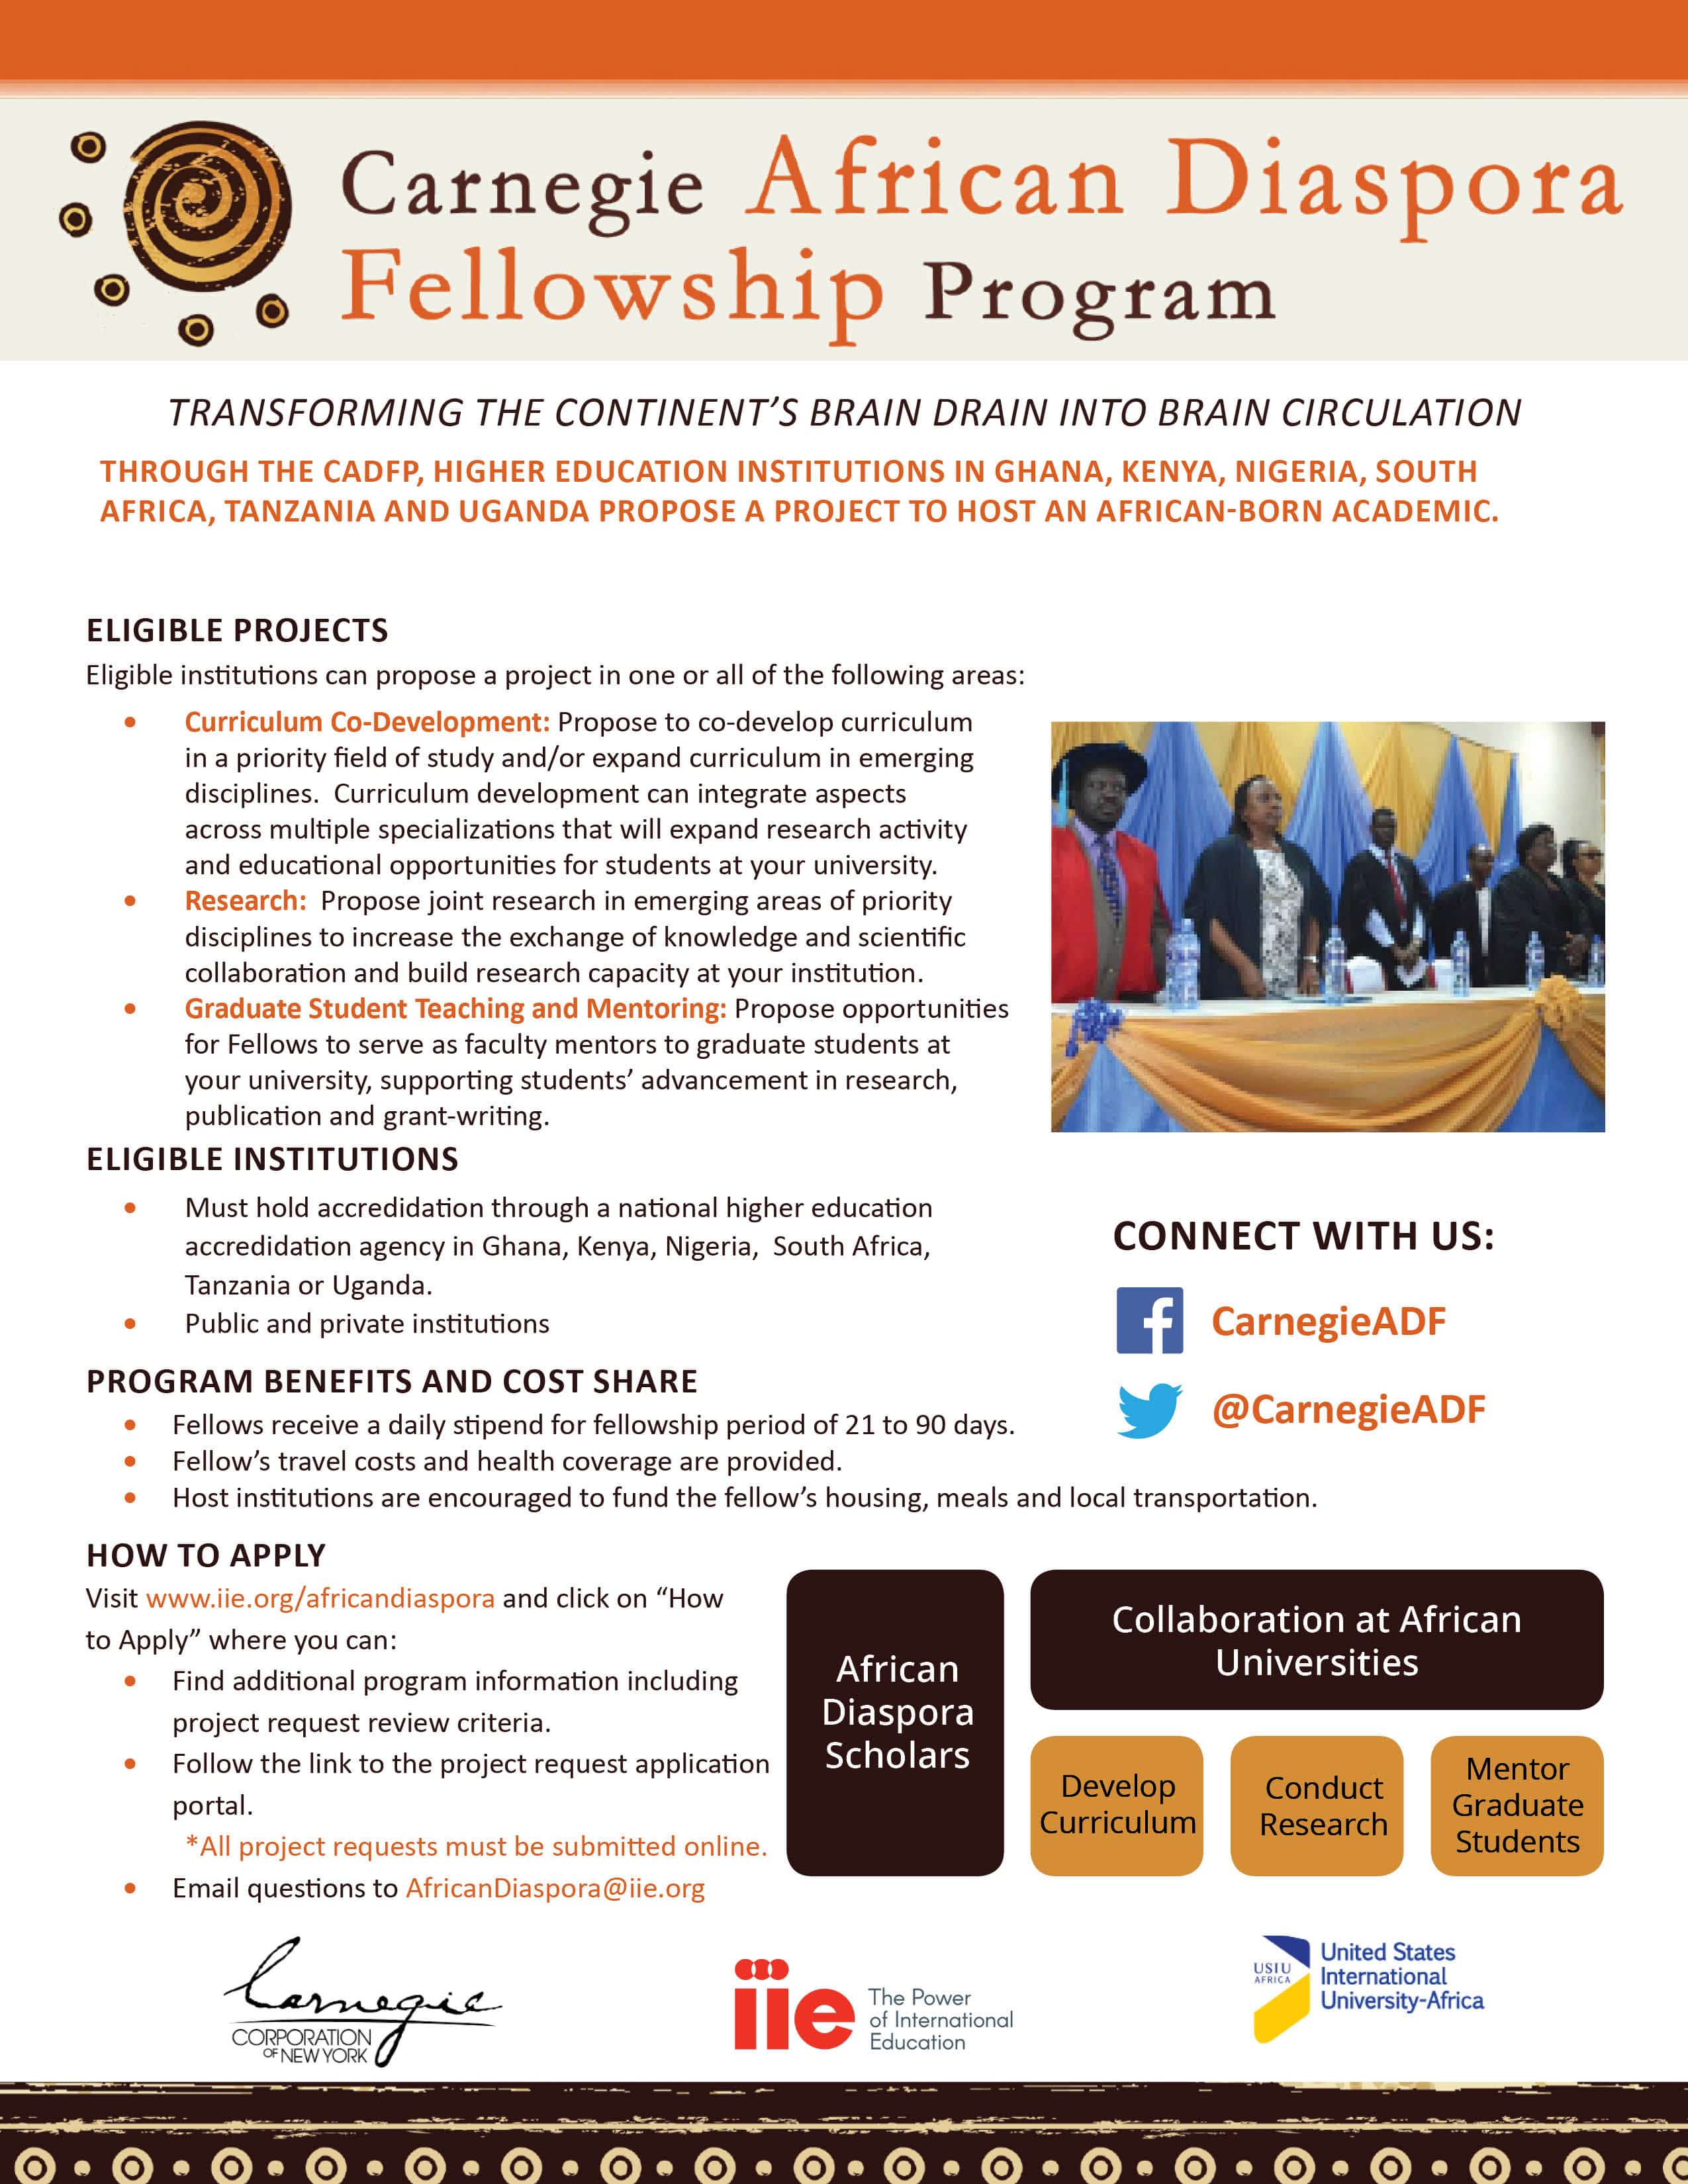 Carnegie African Diaspora Fellowship Programme (CADFP) 2022/2023 for African-Born Researchers in US and Canada